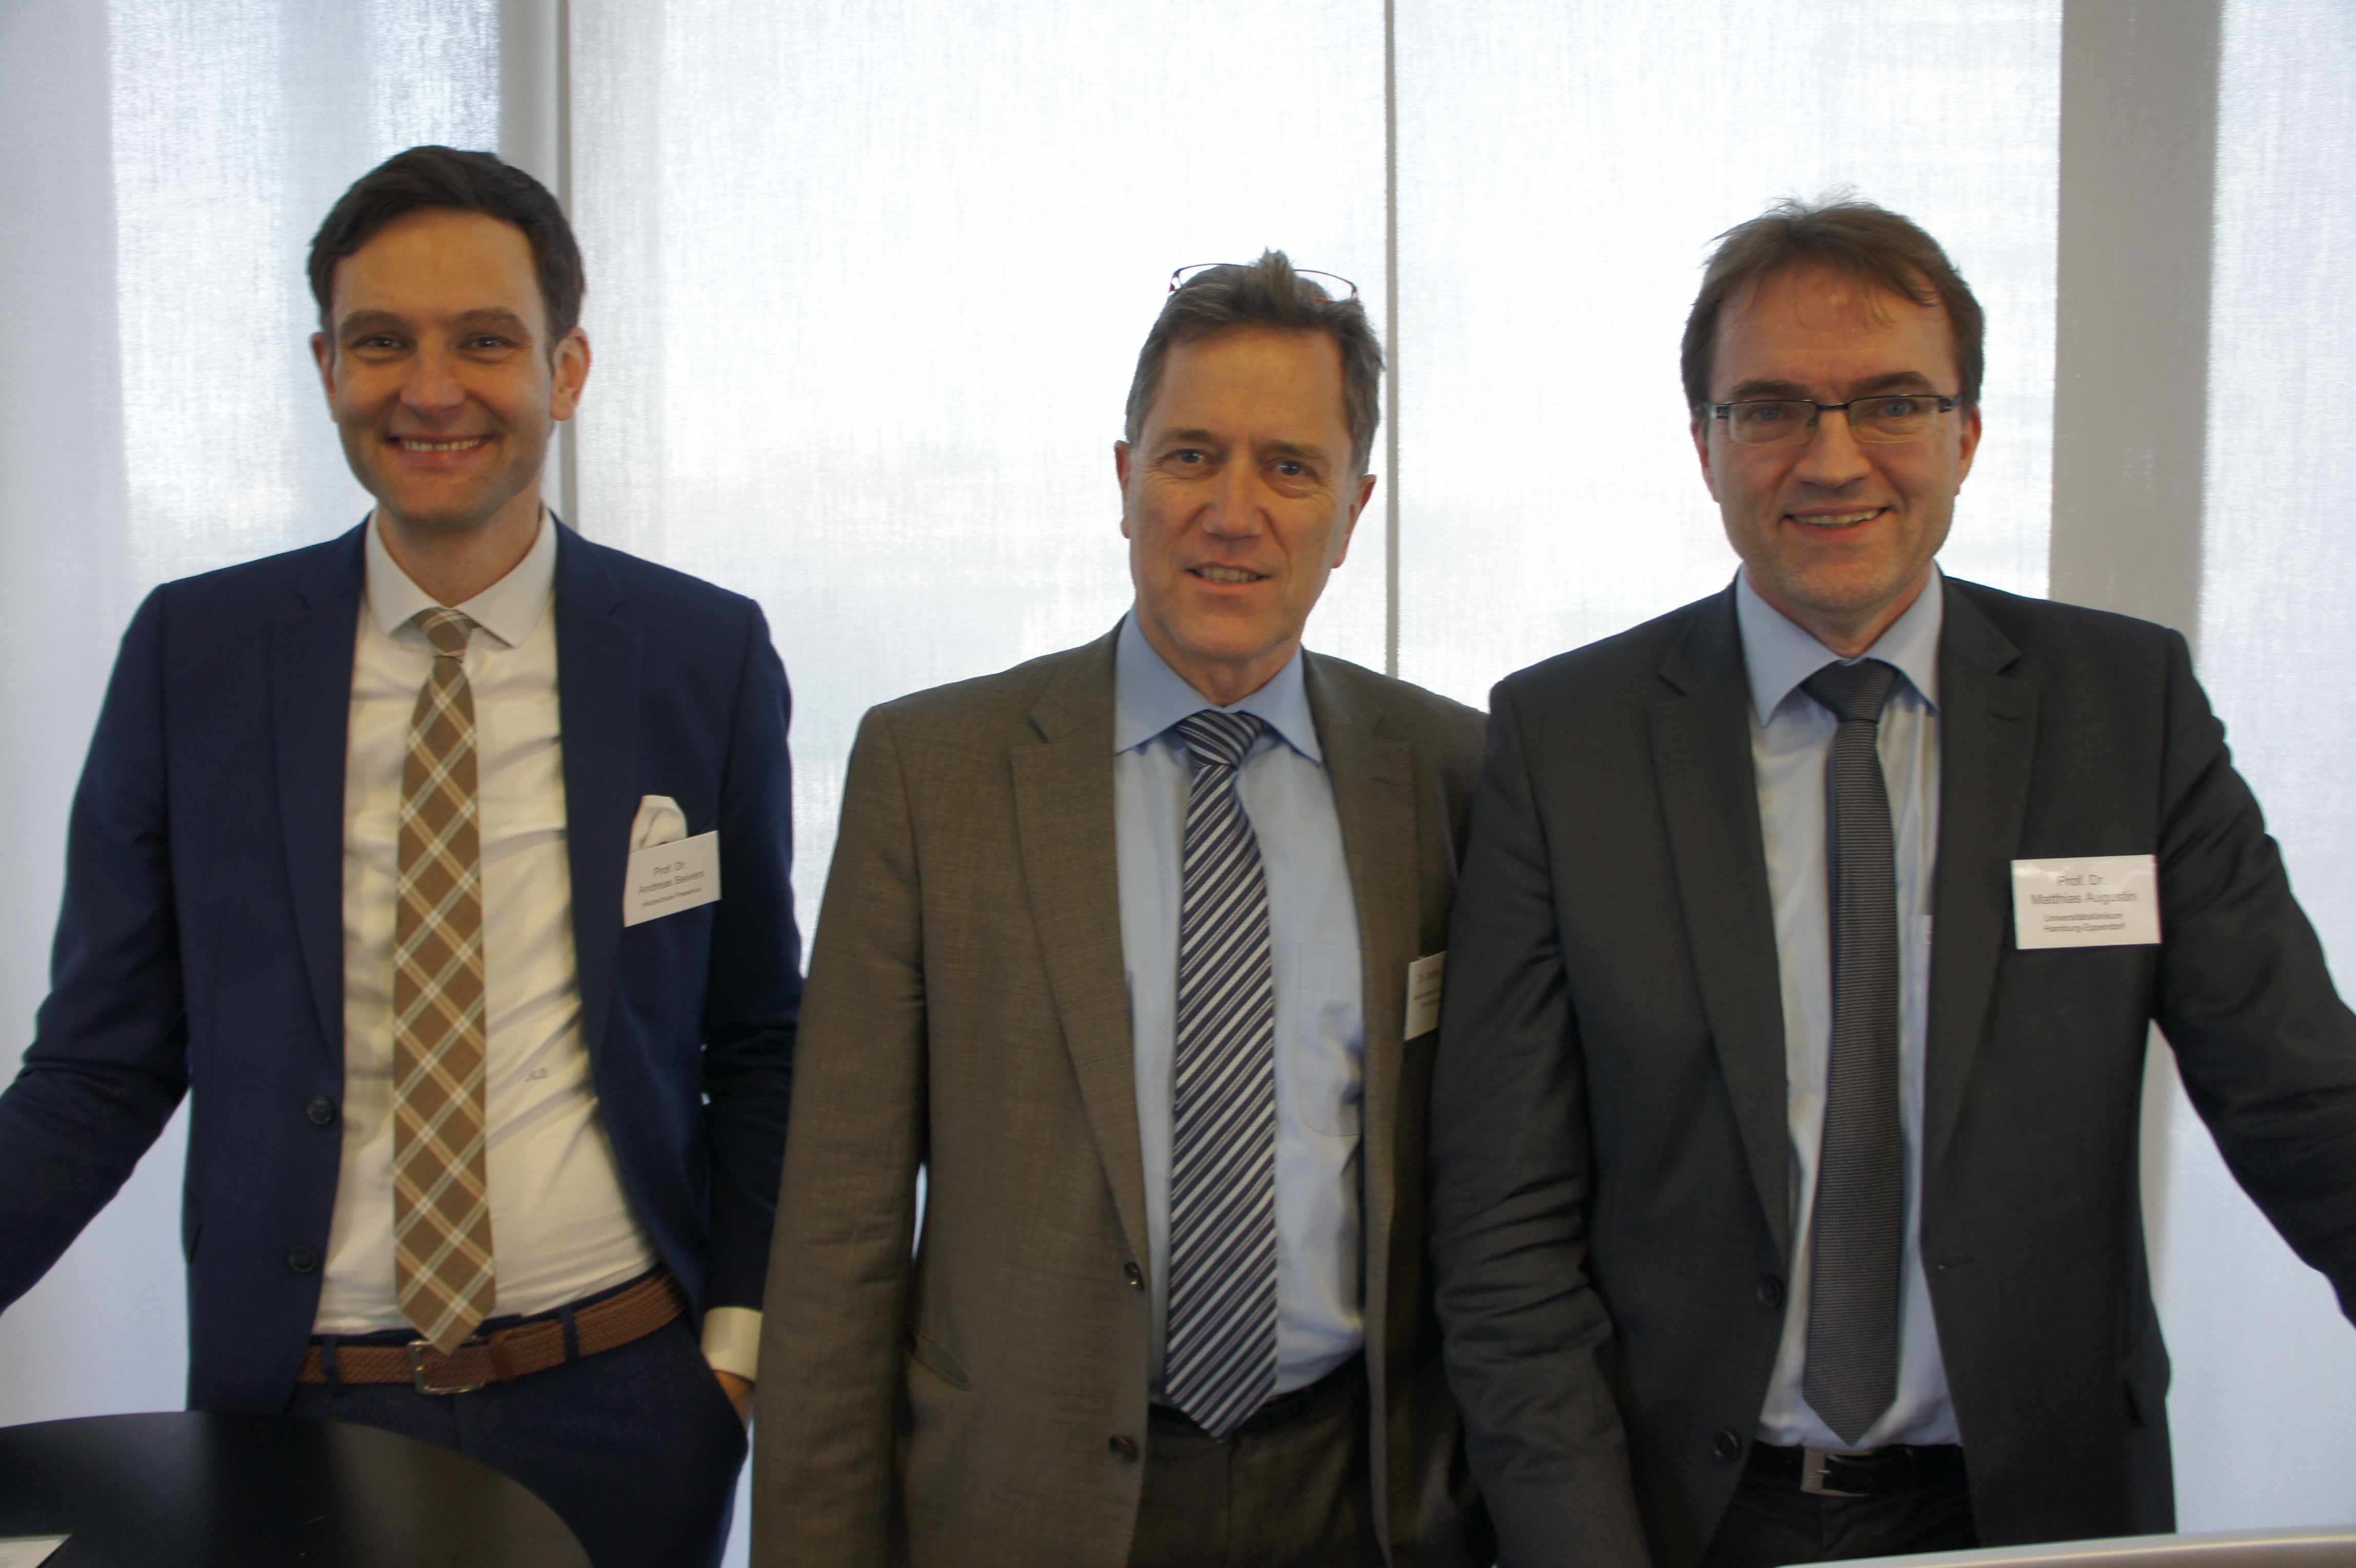 Prof. Dr. Andreas Beivers; Dr. Steffen Gass; Prof. Dr. Matthias Augustin